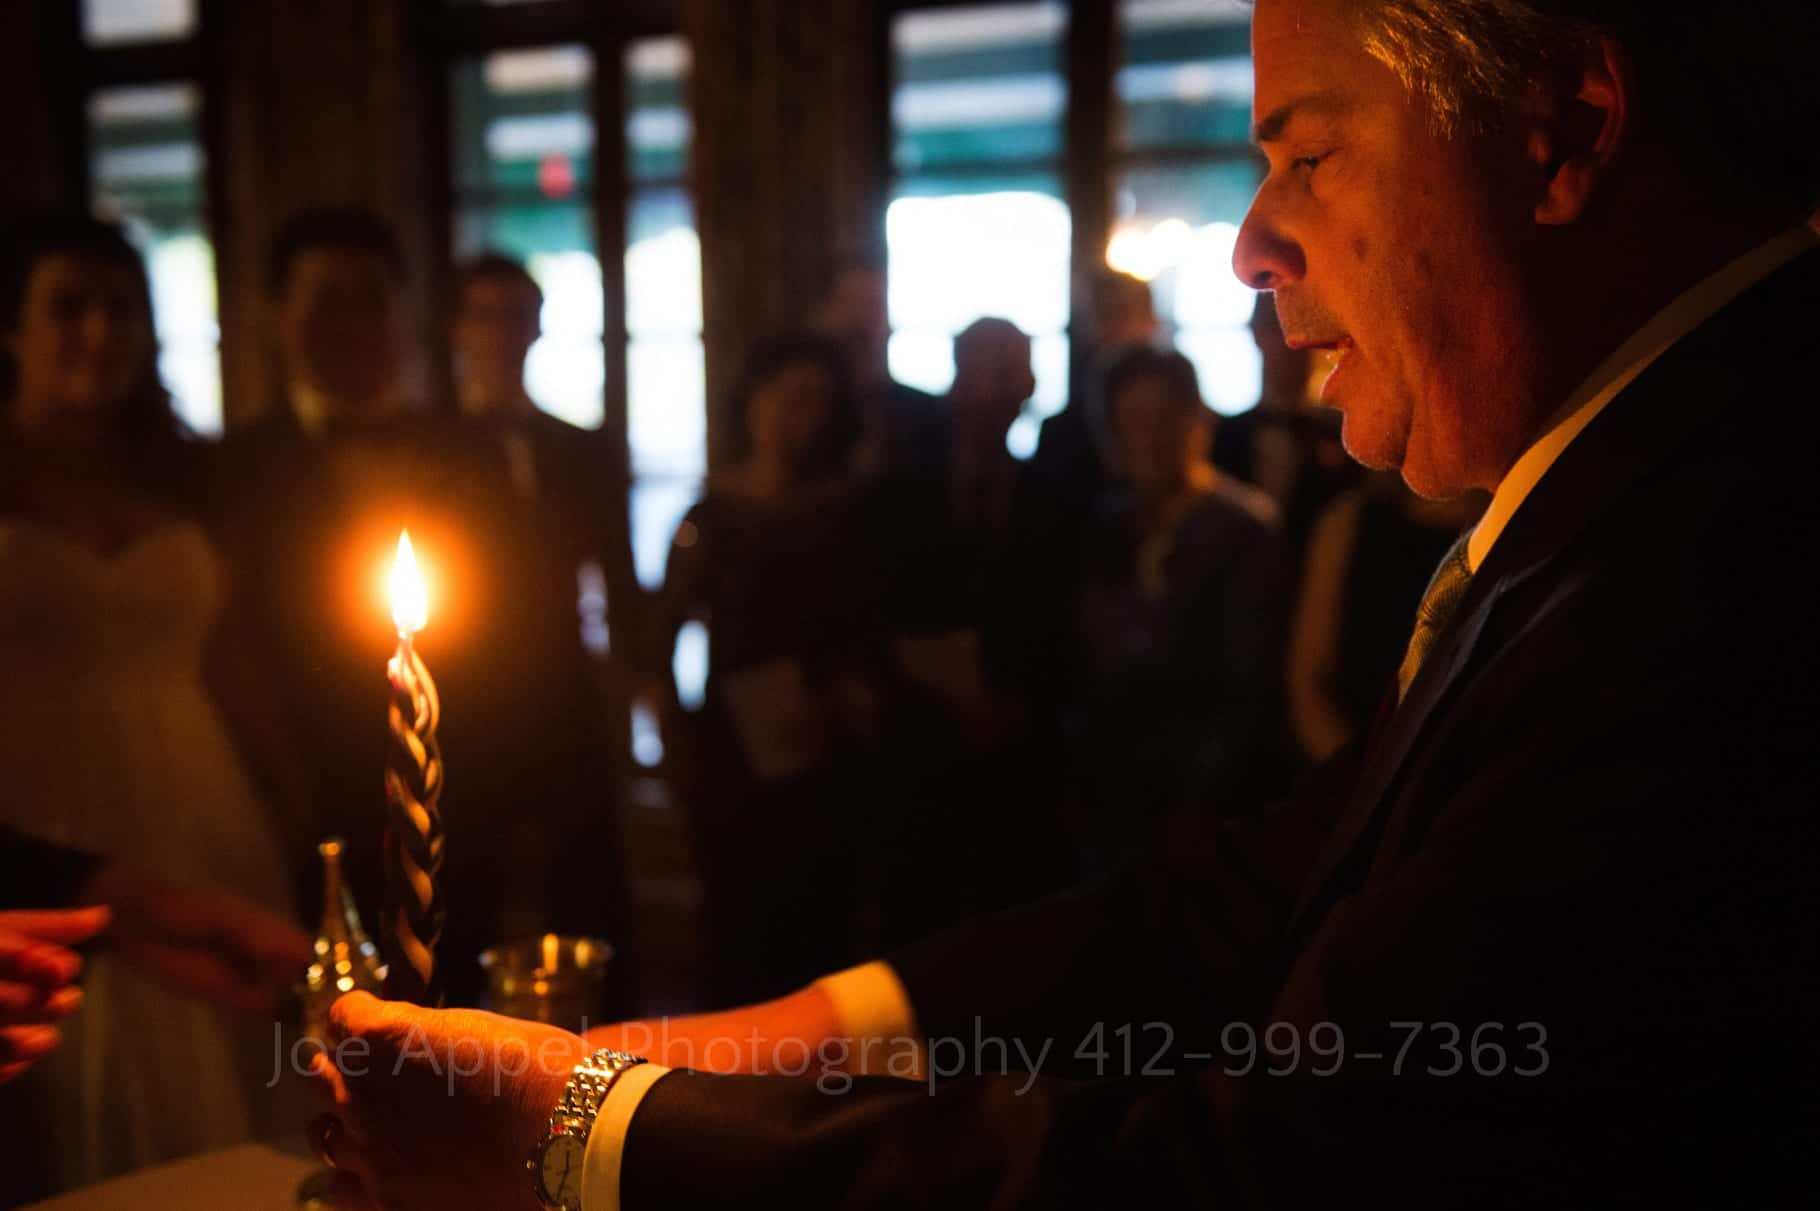 A rabbi chants a prayer as he holds a lit candle during a ketubah signing ceremony